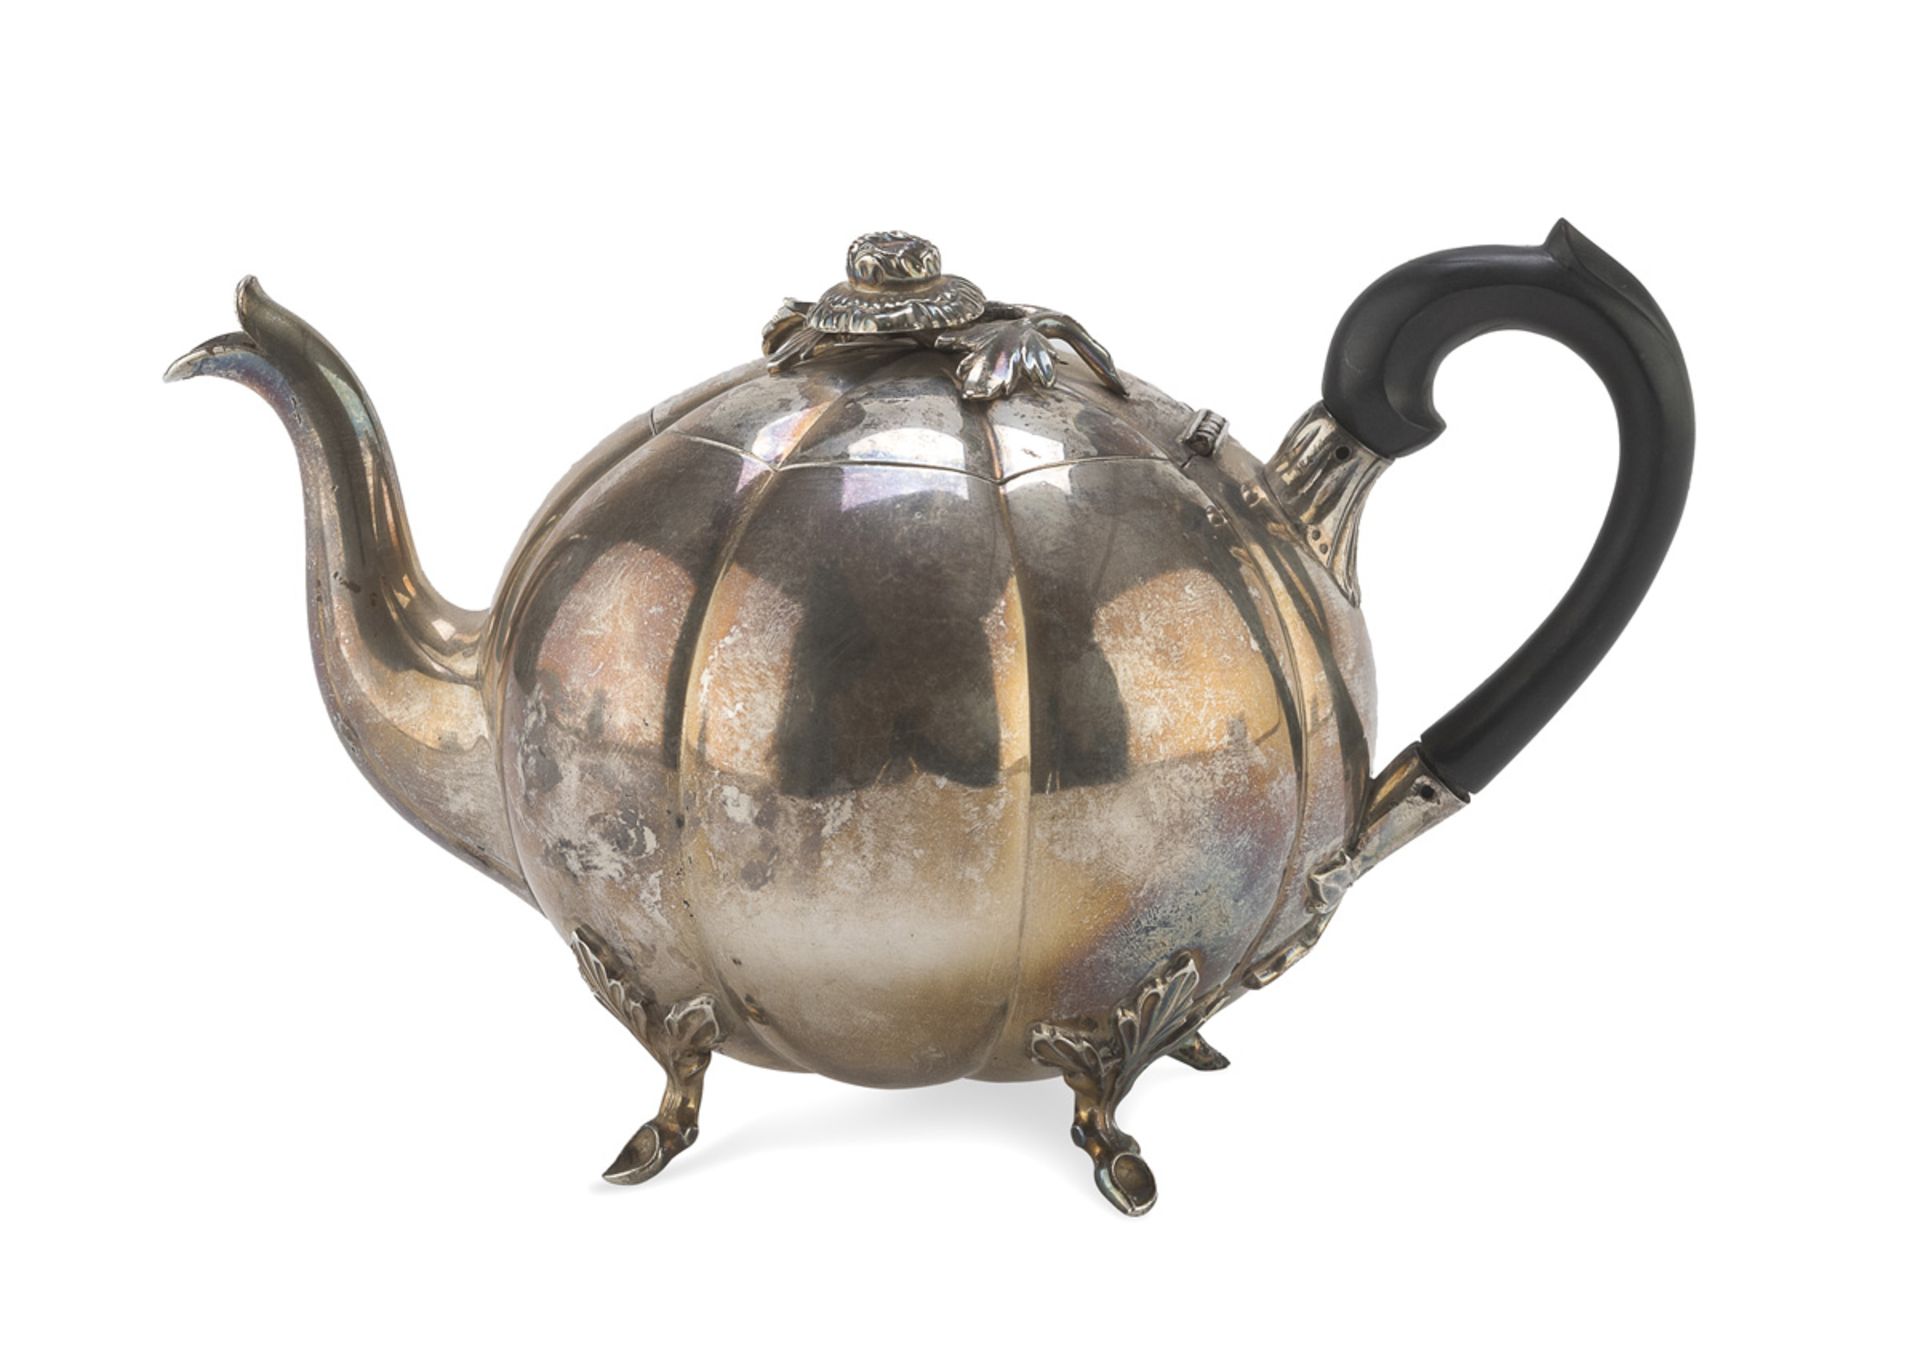 SILVER TEAPOT - PUNCH AMSTERDAM LATE 19TH CENTURY